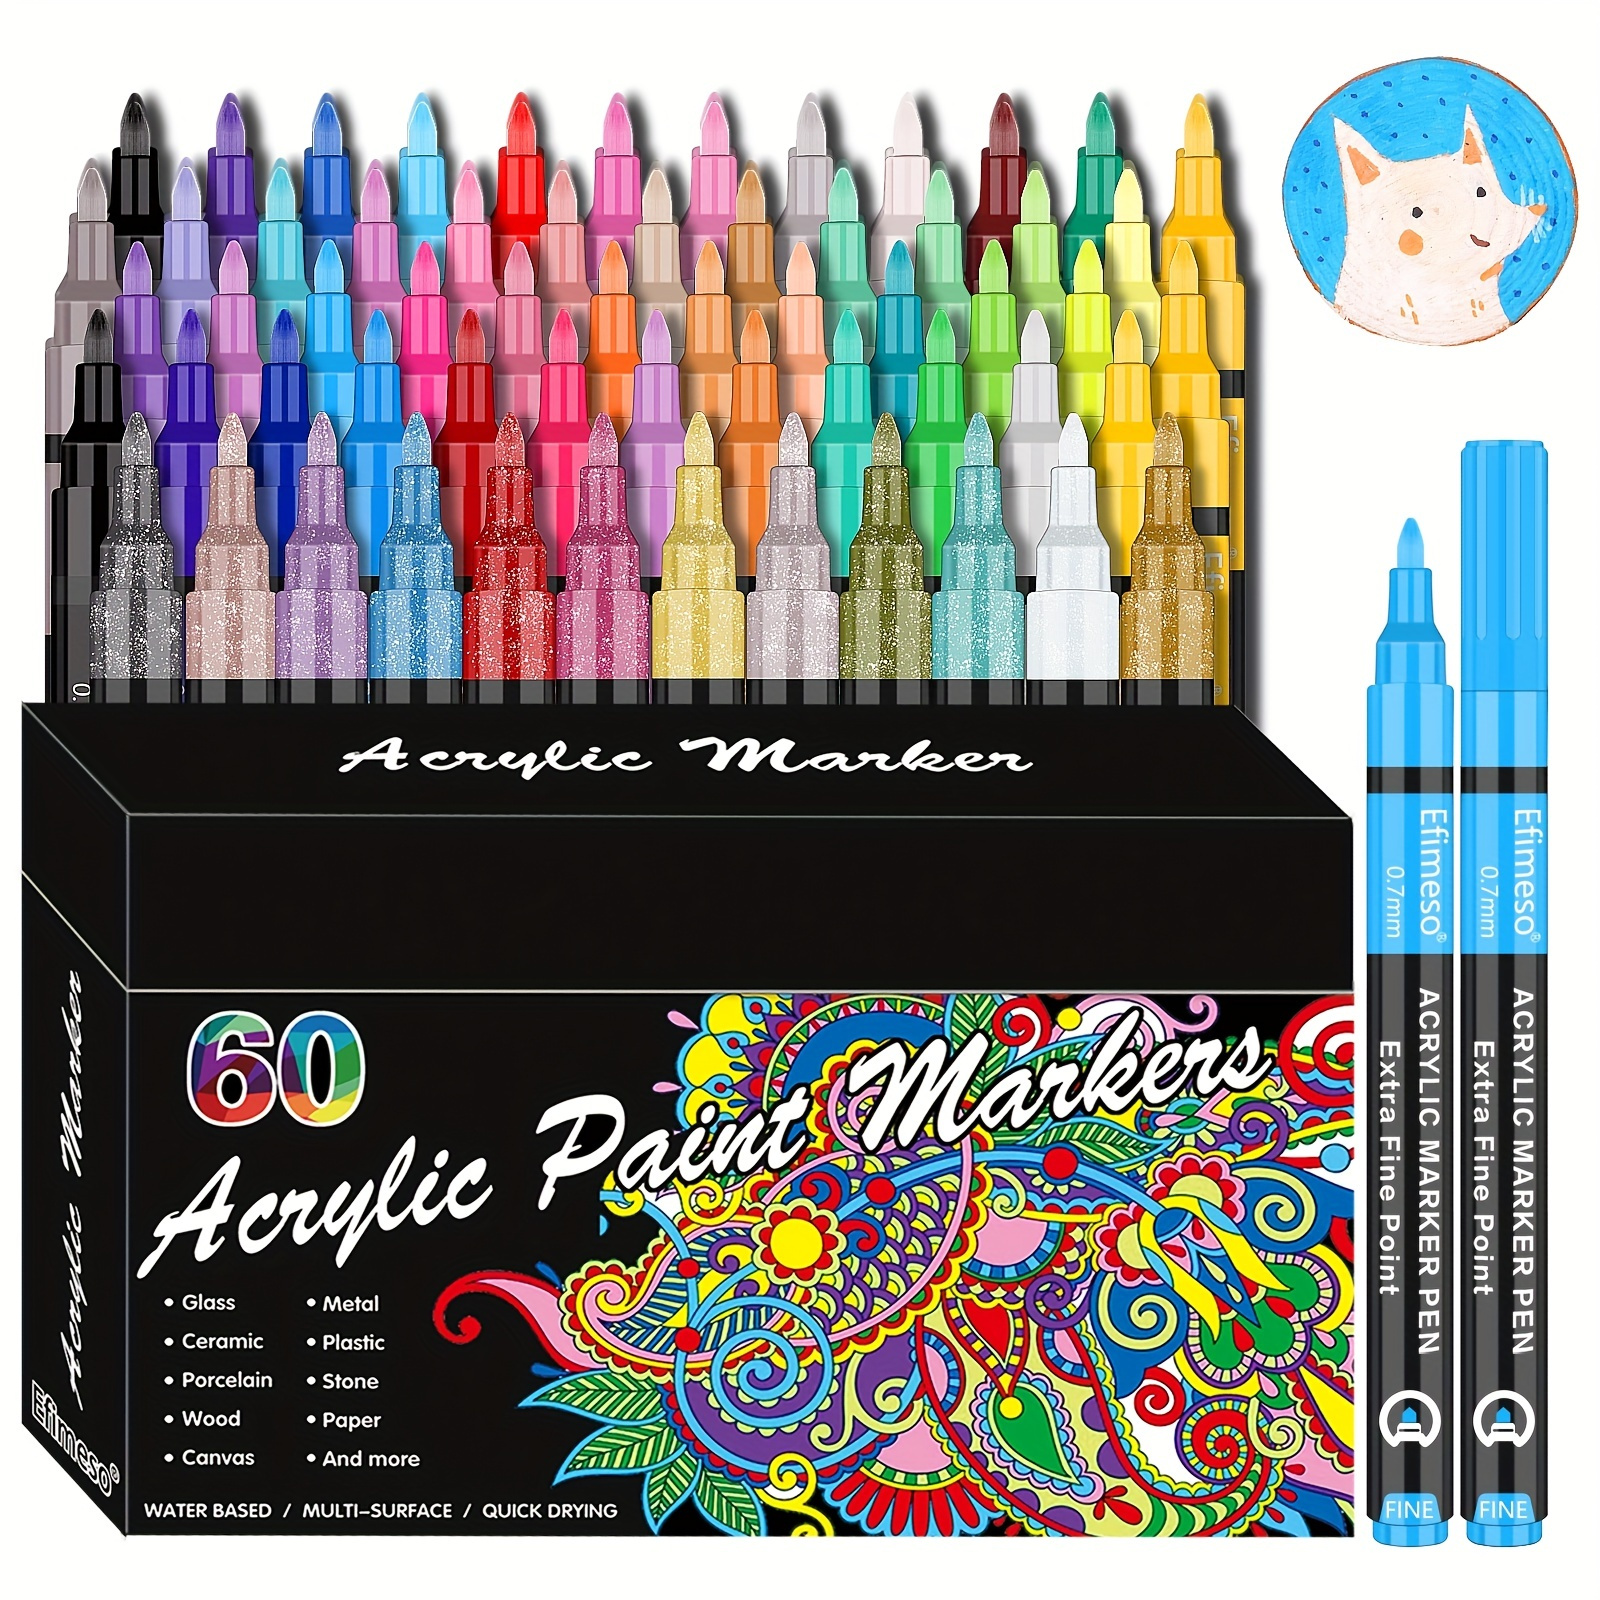 ARTISTRO Paint Pens for Rock Painting, Stone, Ceramic, Glass, Wood, Tire,  Fabric, Metal, Canvas. Set of 12 Markers for Acrylic Painting, Water-based